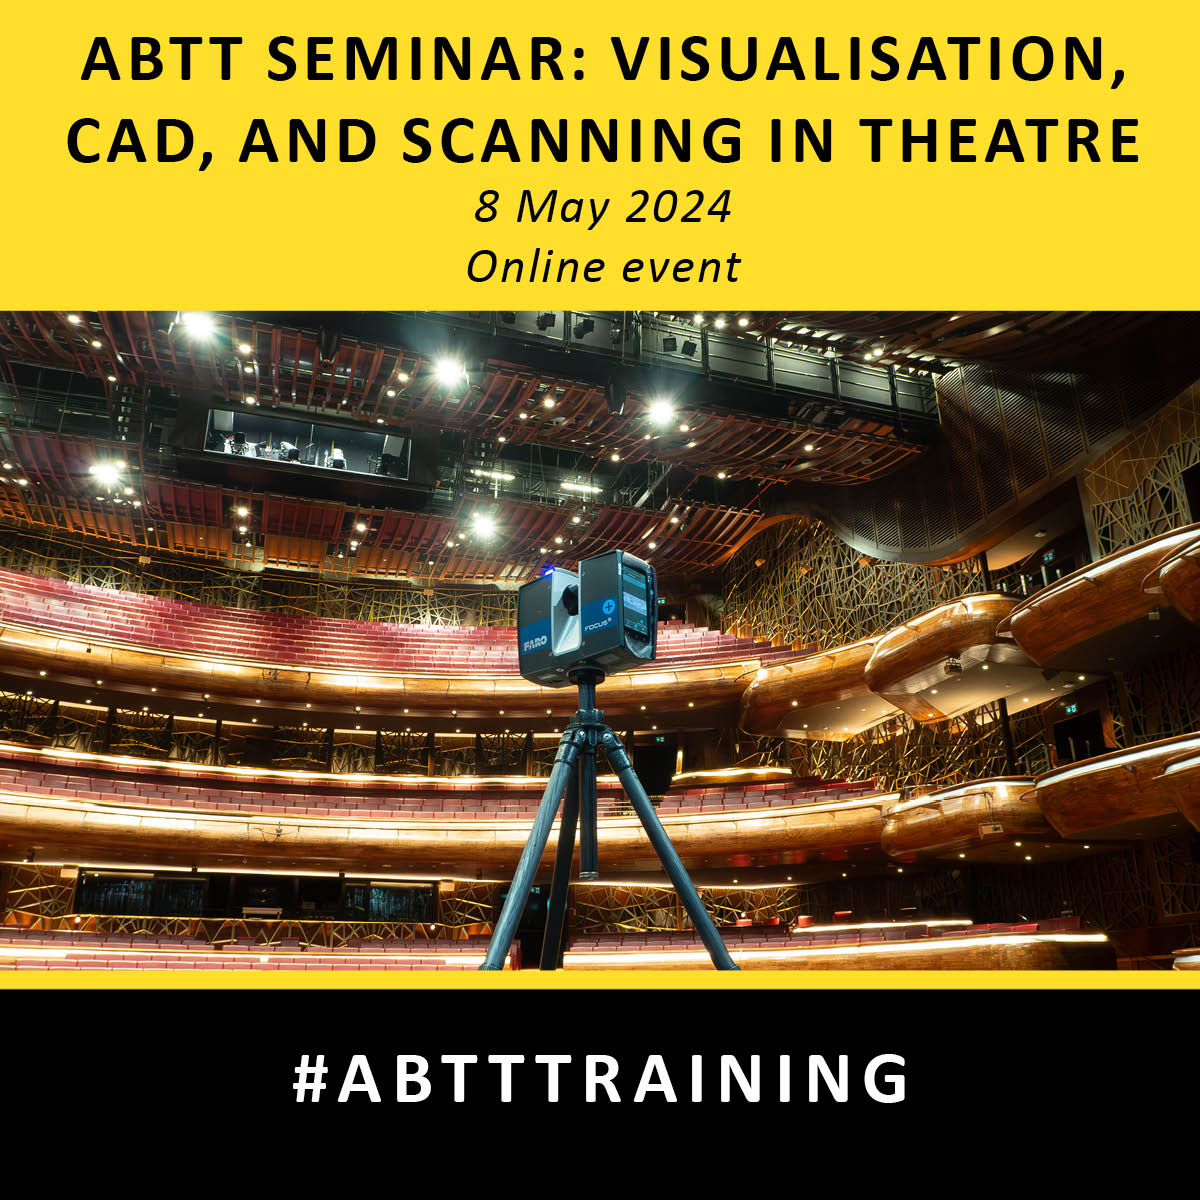 Don’t miss “Visualisation, CAD, and Scanning in Theatre,” an enlightening and comprehensive online seminar highlighting the cutting-edge visualisation technology shaping the future of theatre. 

FREE for ABTT members.

Book here: abtt.org.uk/events/abtt-se…

#ABTT #ABTTtraining